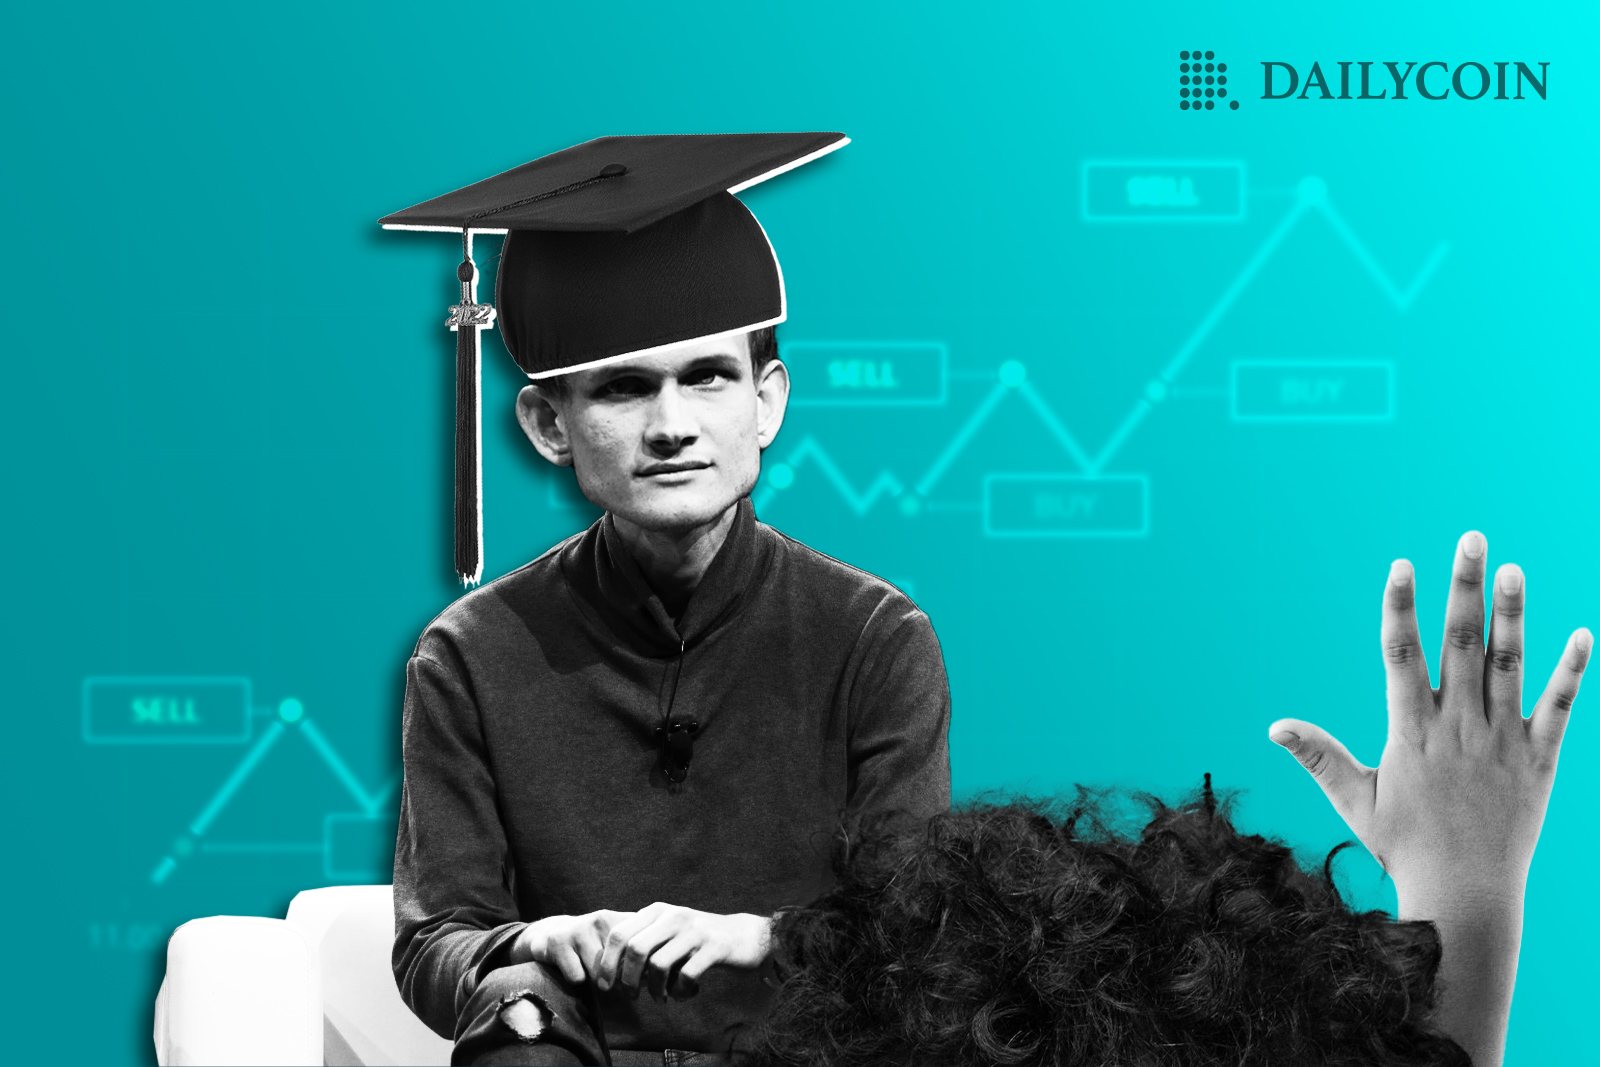 Ethereum co-founder Vitalik Buterin with a college graduation cap behind a person rising a hand